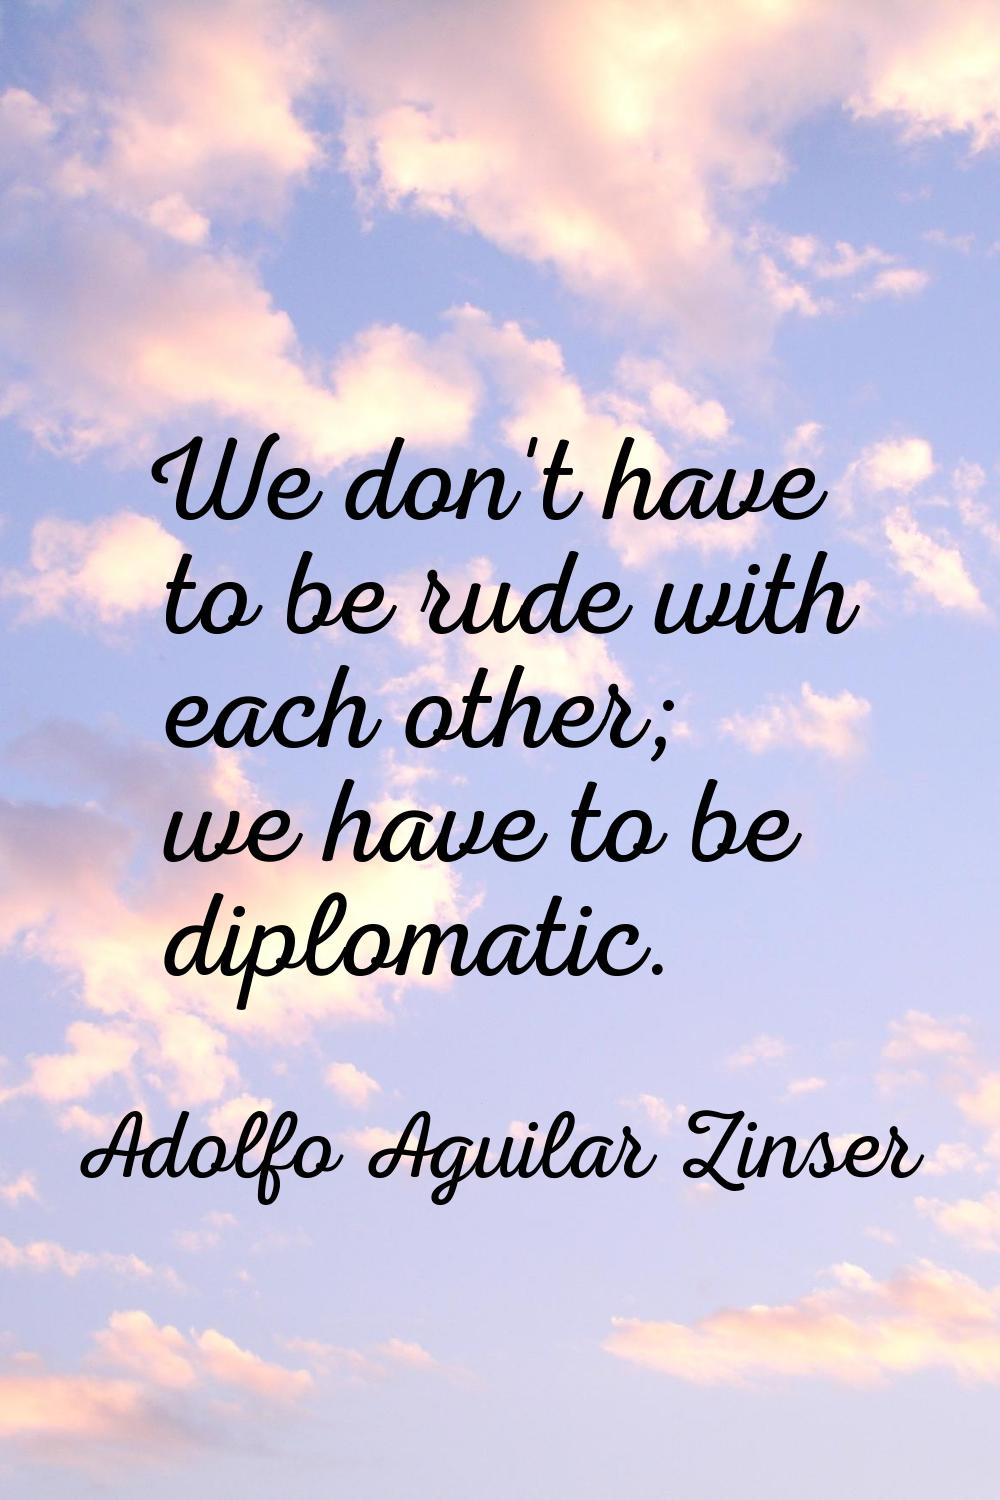 We don't have to be rude with each other; we have to be diplomatic.